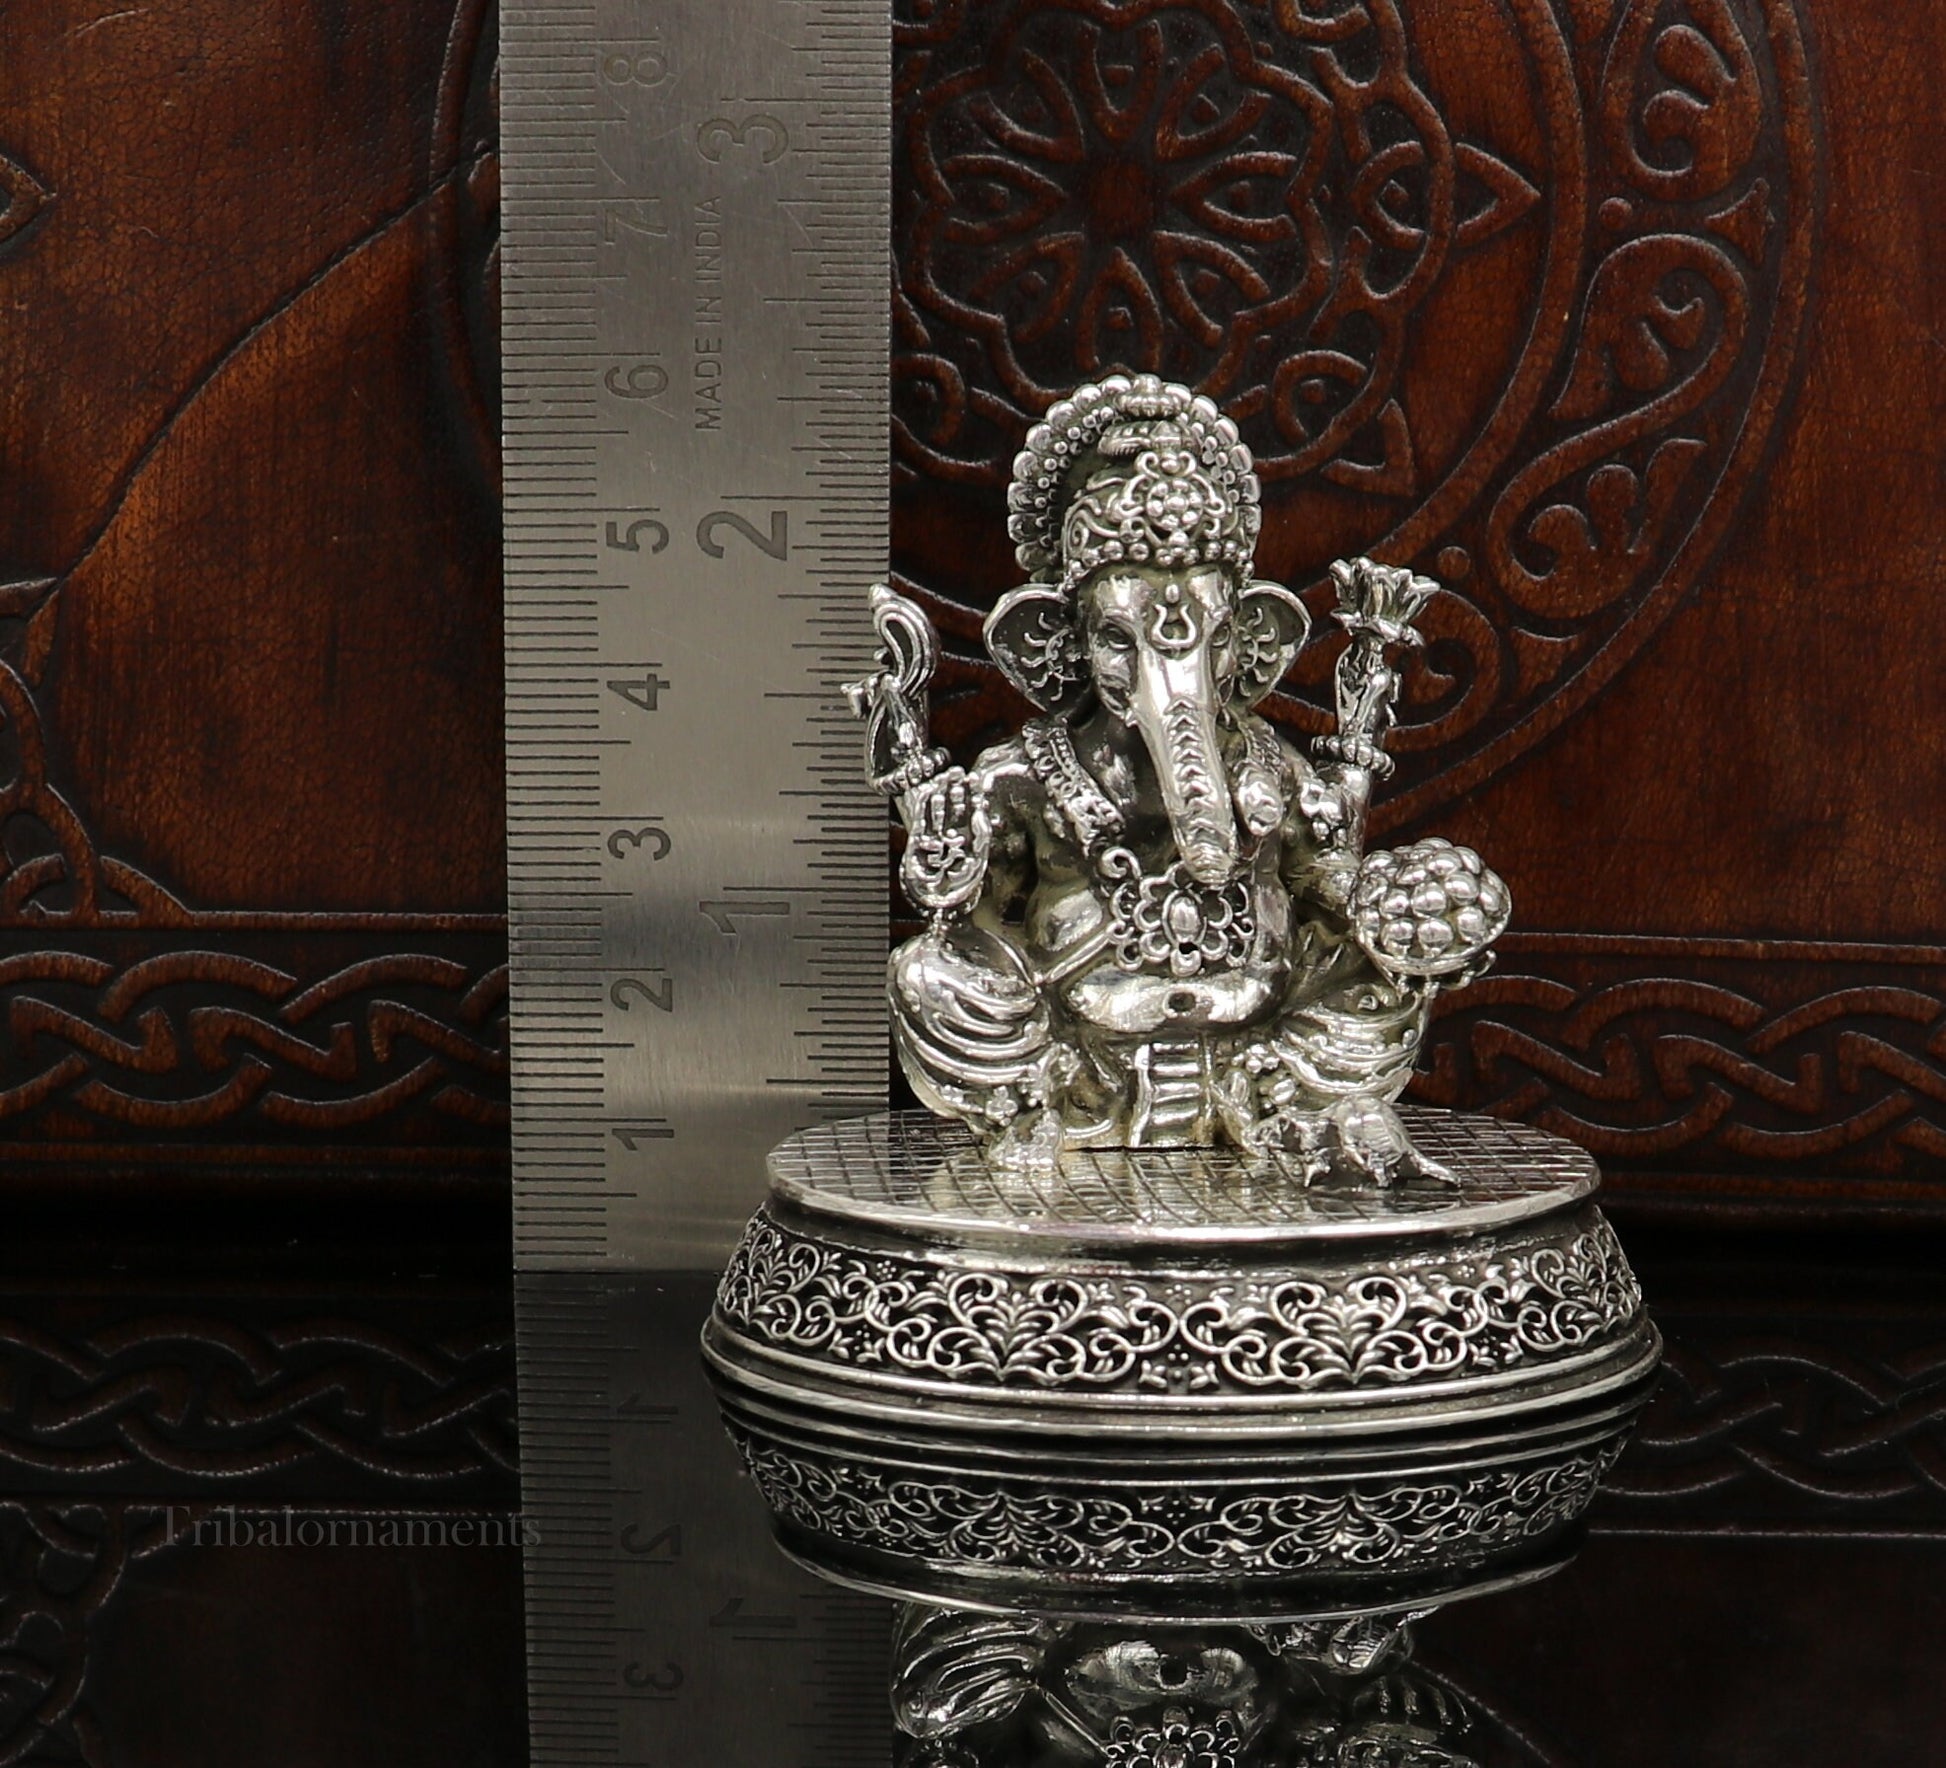 925 Sterling silver Lord Ganesh Idol, Pooja Articles, Silver Idols Figurine, handcrafted Lord Ganesh statue sculpture gifting art art218 - TRIBAL ORNAMENTS